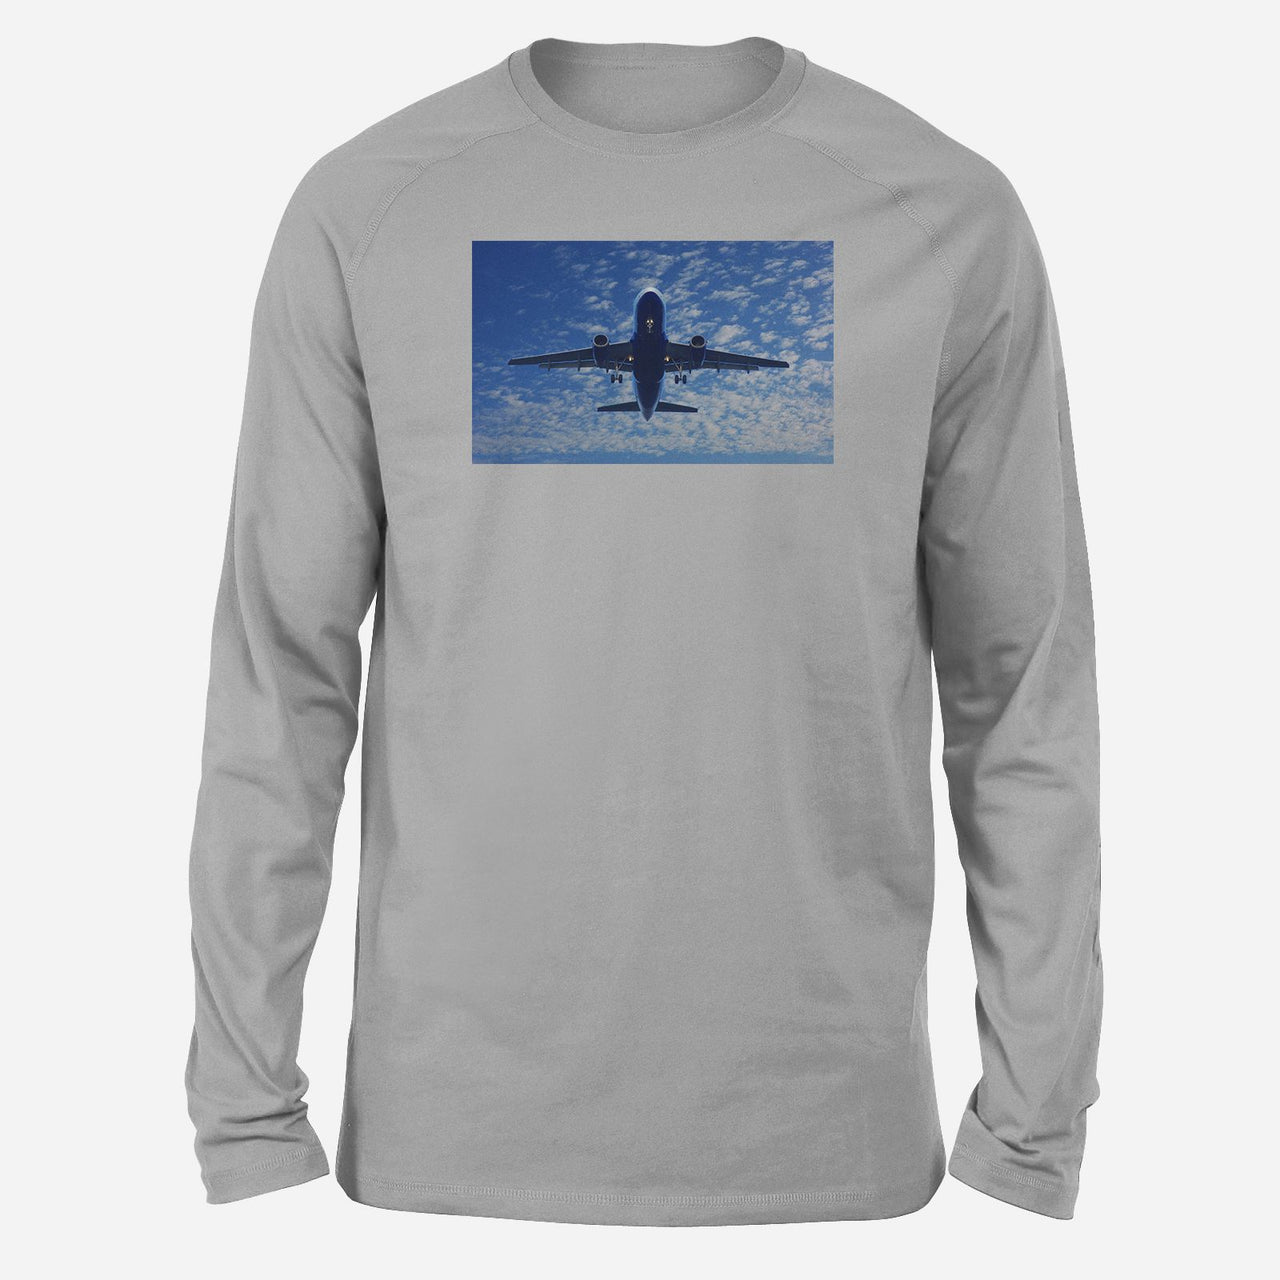 Airplane From Below Designed Long-Sleeve T-Shirts